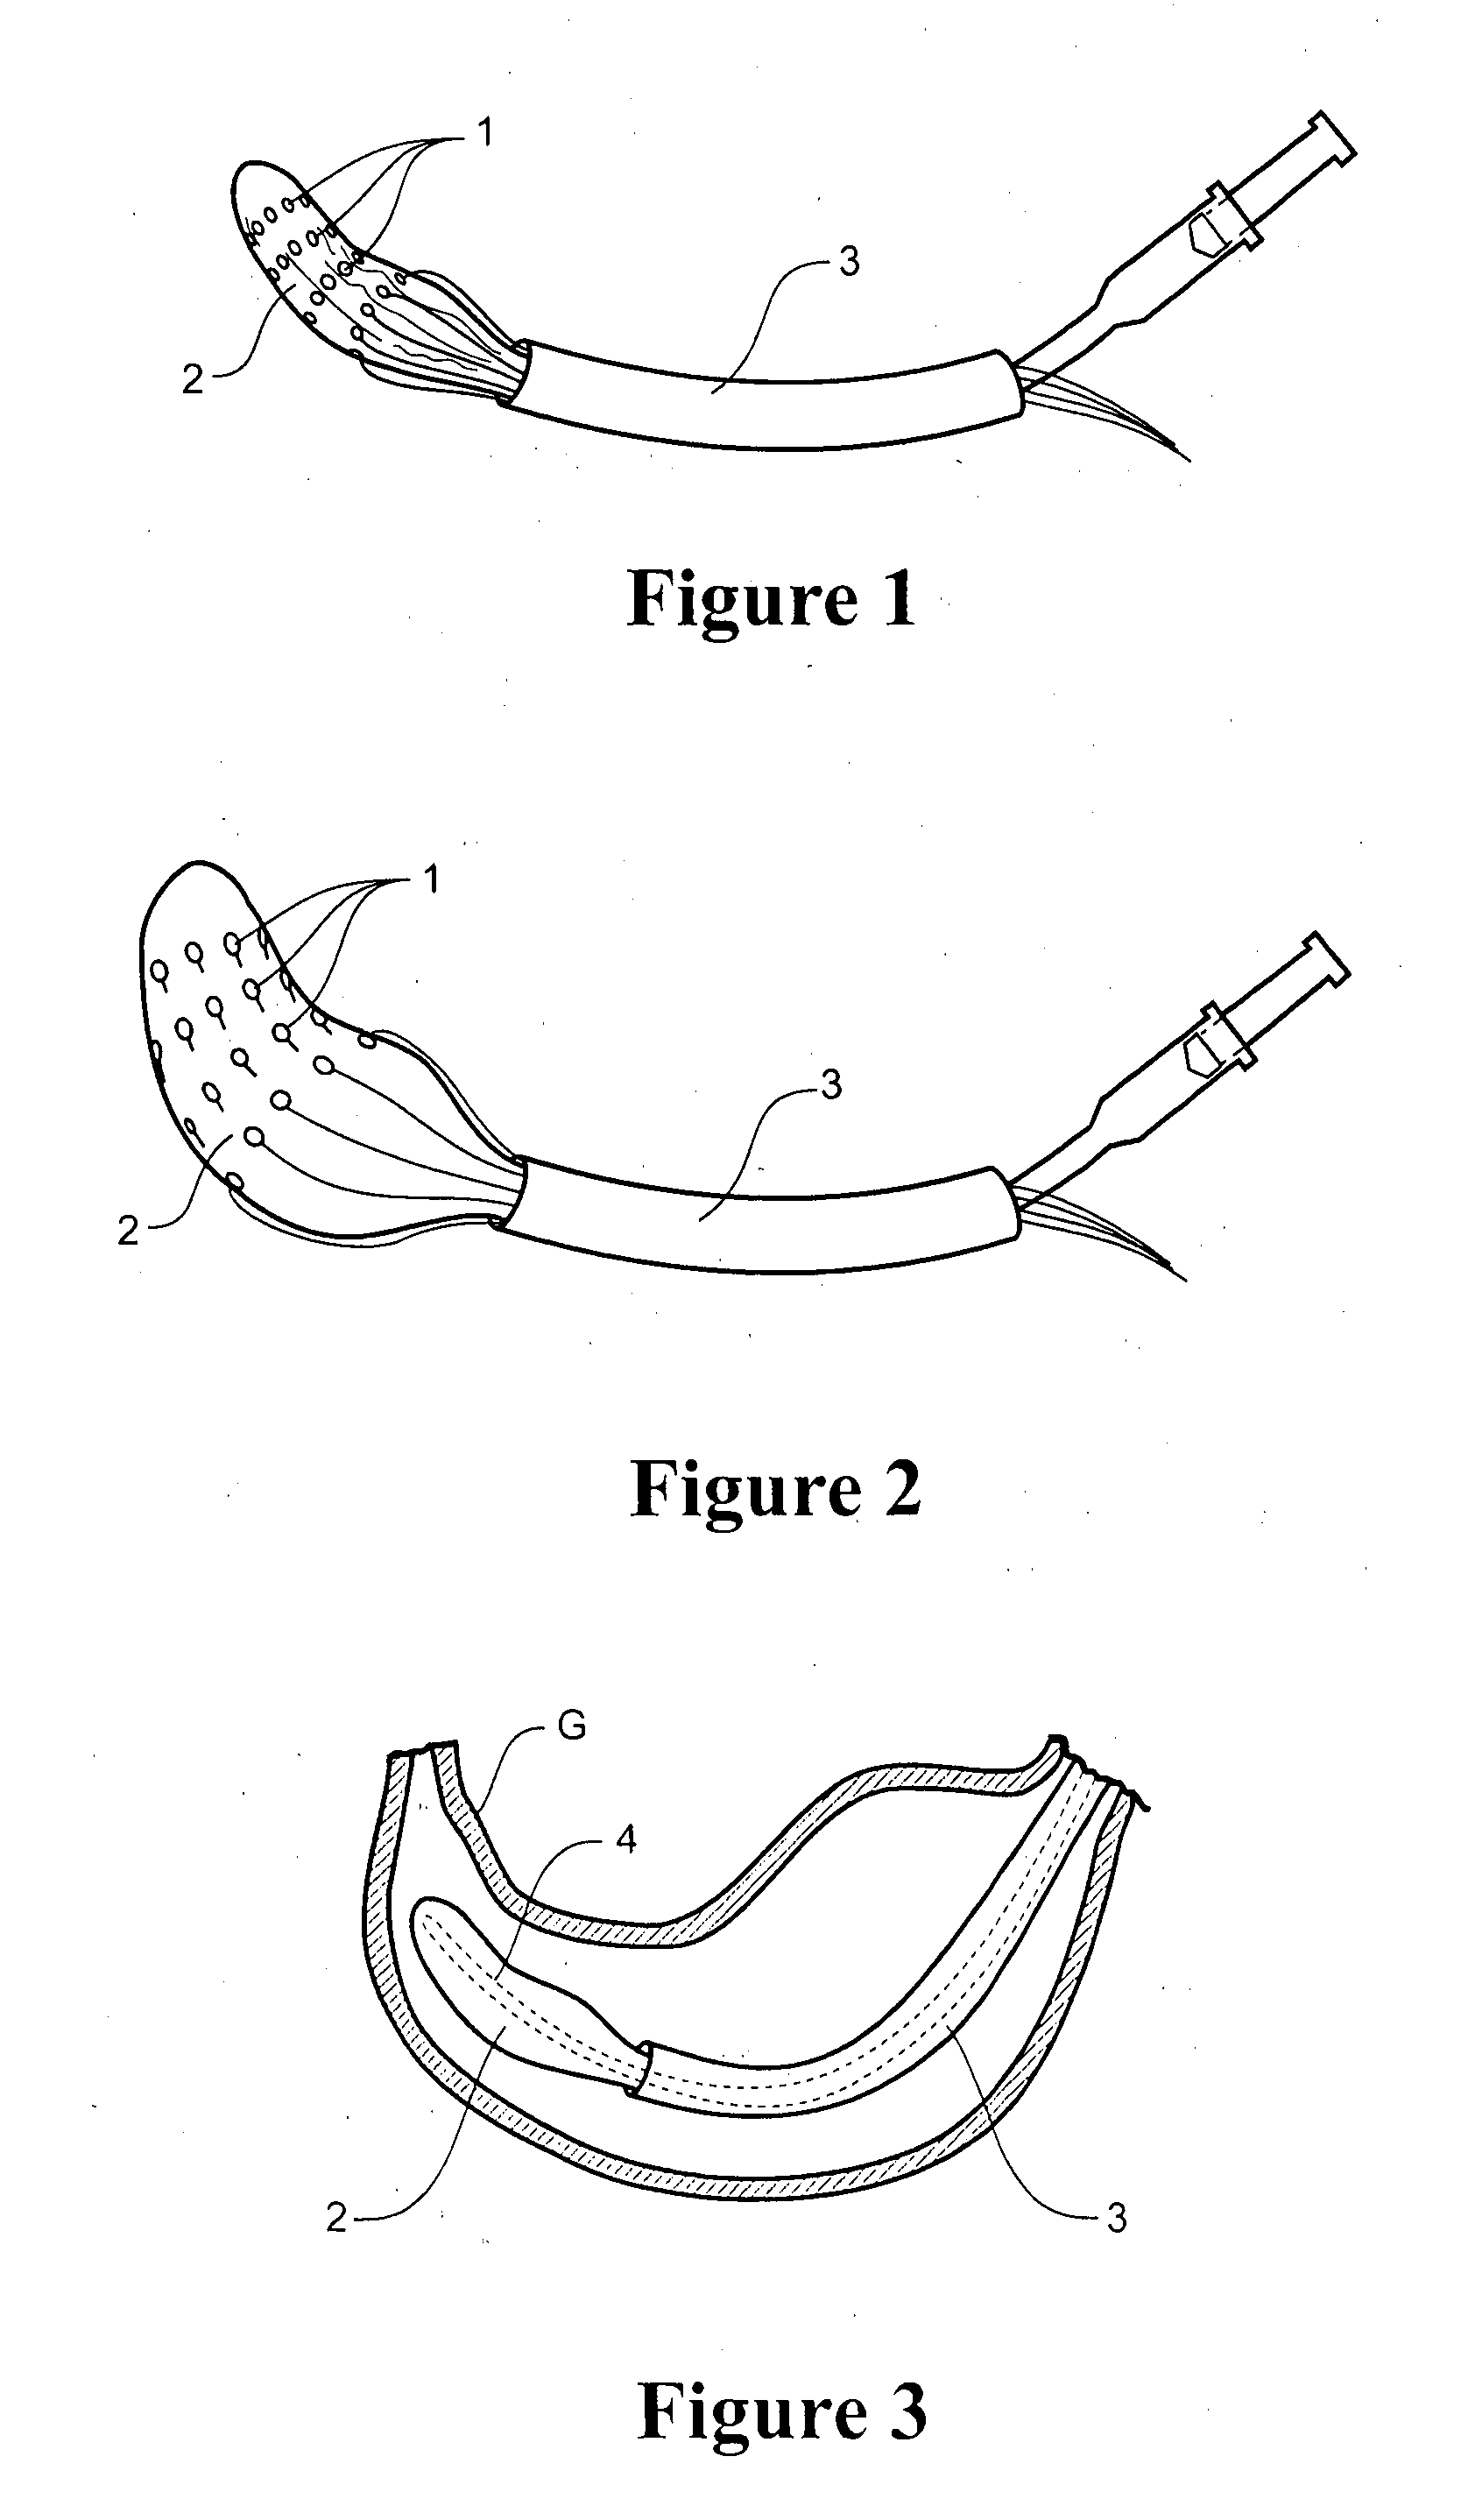 System and method for mapping gastro-intestinal electrical activity